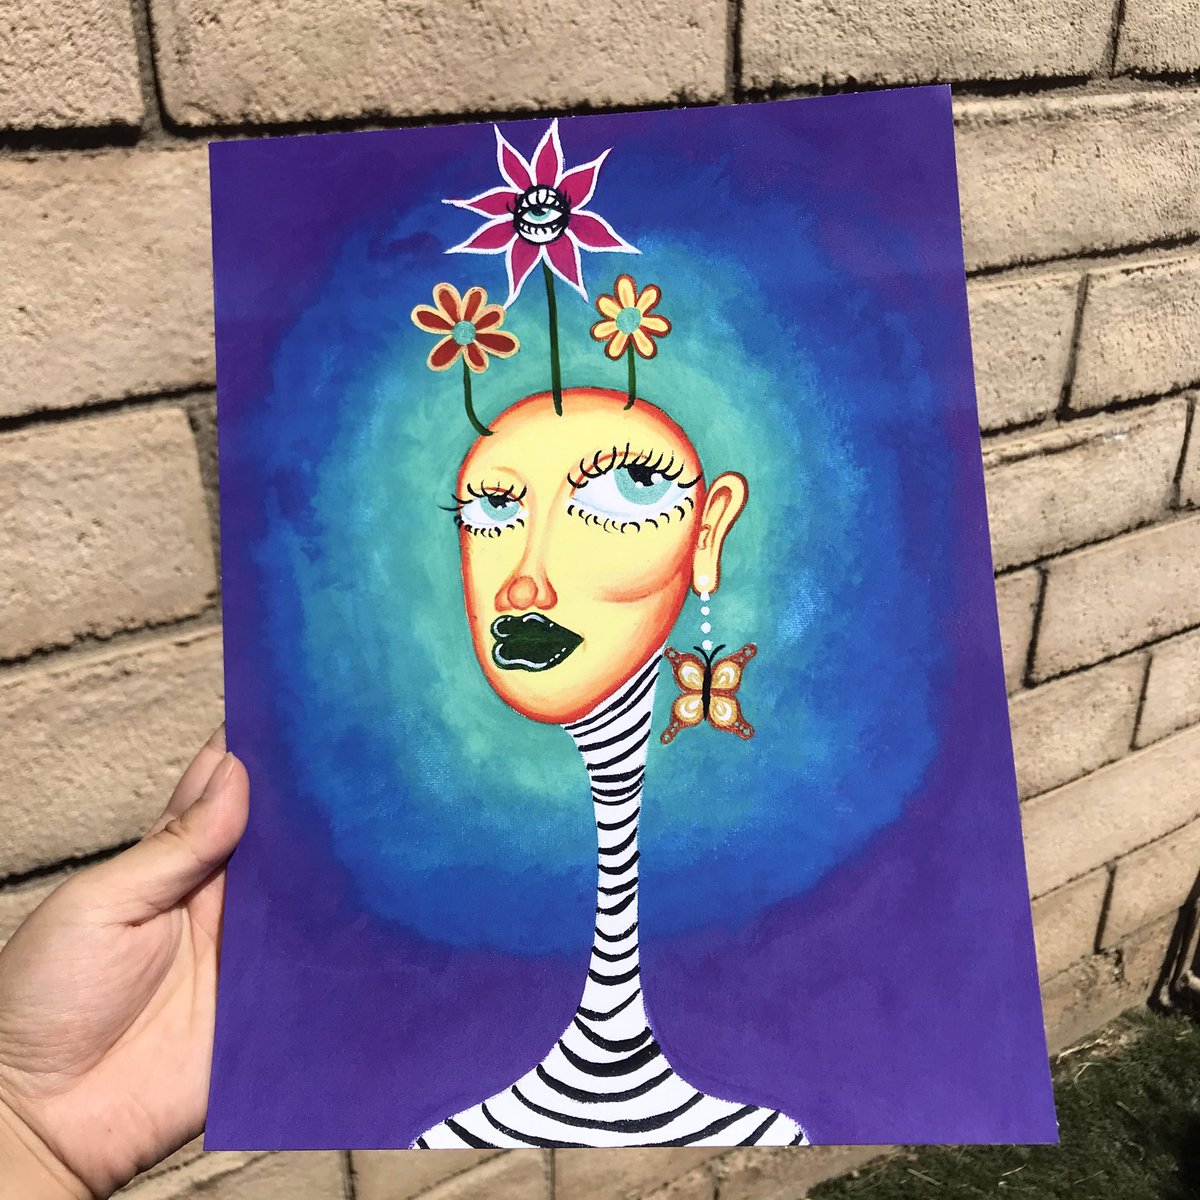 MEET JESSIE:Hello! I’m Jessie  @JessieFlysHigh_ I make mixed media art/digital collages of my drawings and paintings. I sell prints, stickers, keychains, handbags and other cute things with my art on them in my shop  http://weirdmind.bigcartel.com   https://twitter.com/messages/media/1264766999021760516